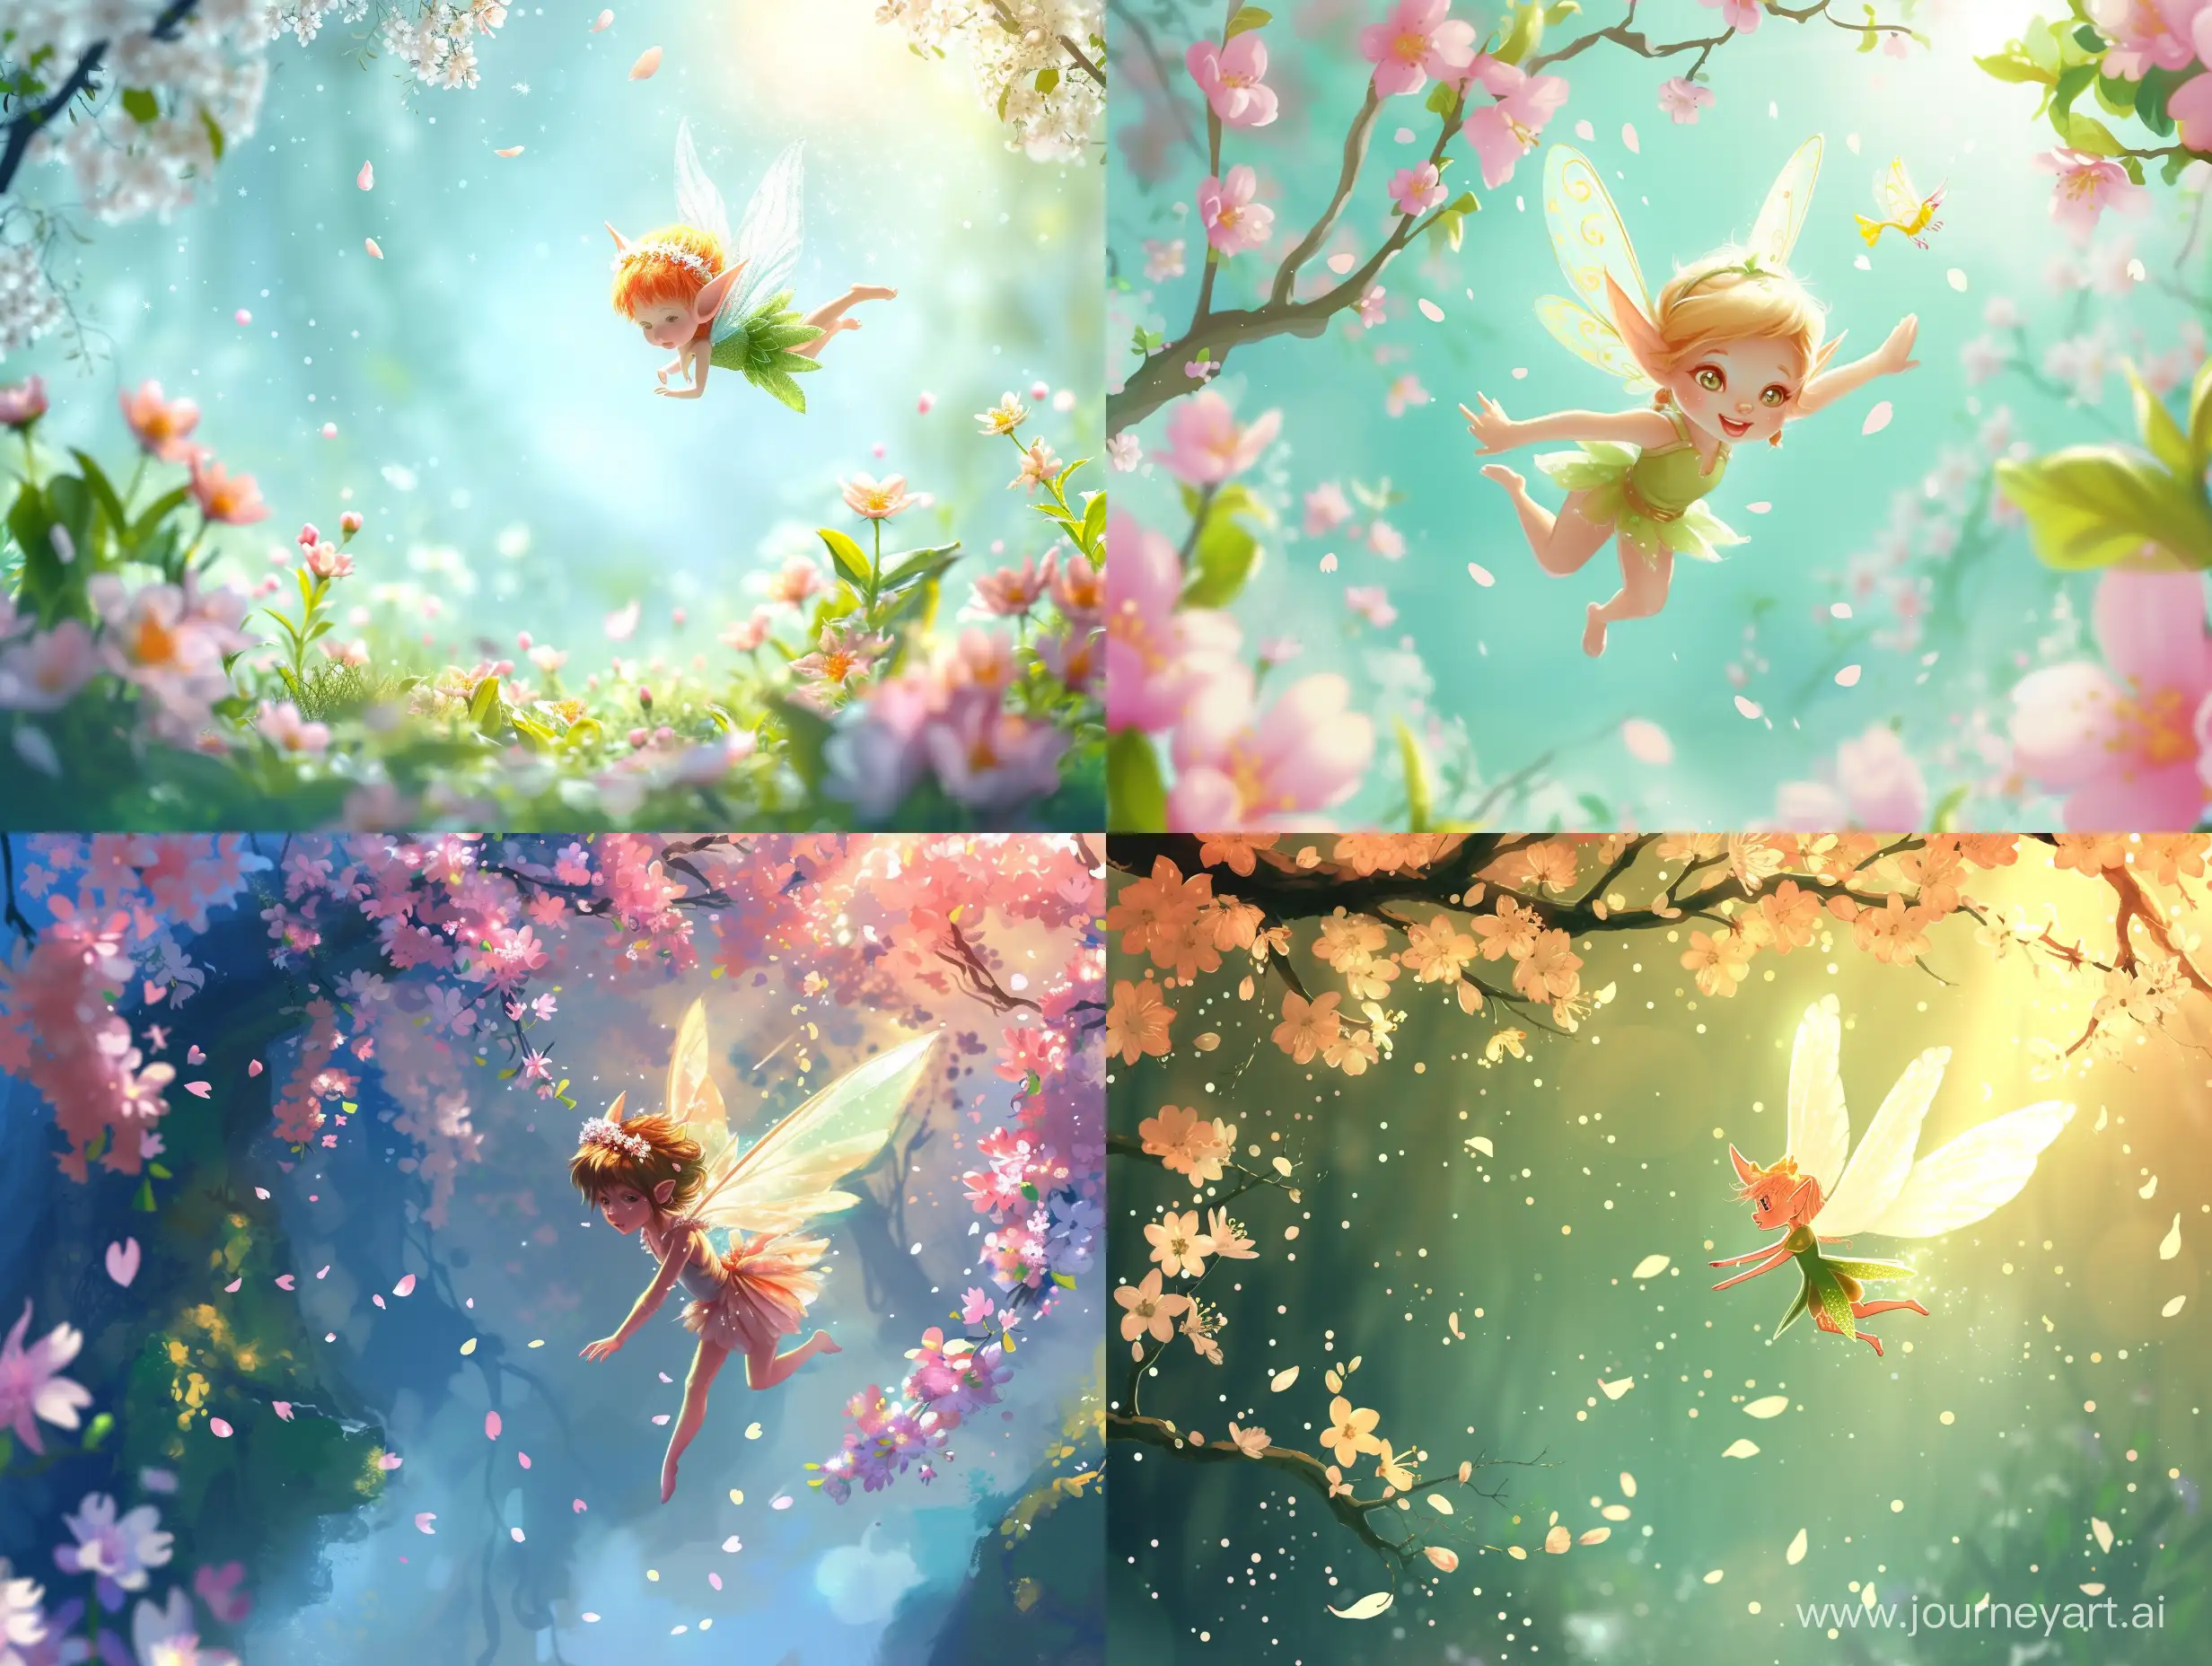 Enchanting-Pixie-Soaring-Over-Whimsical-Blooming-Forest